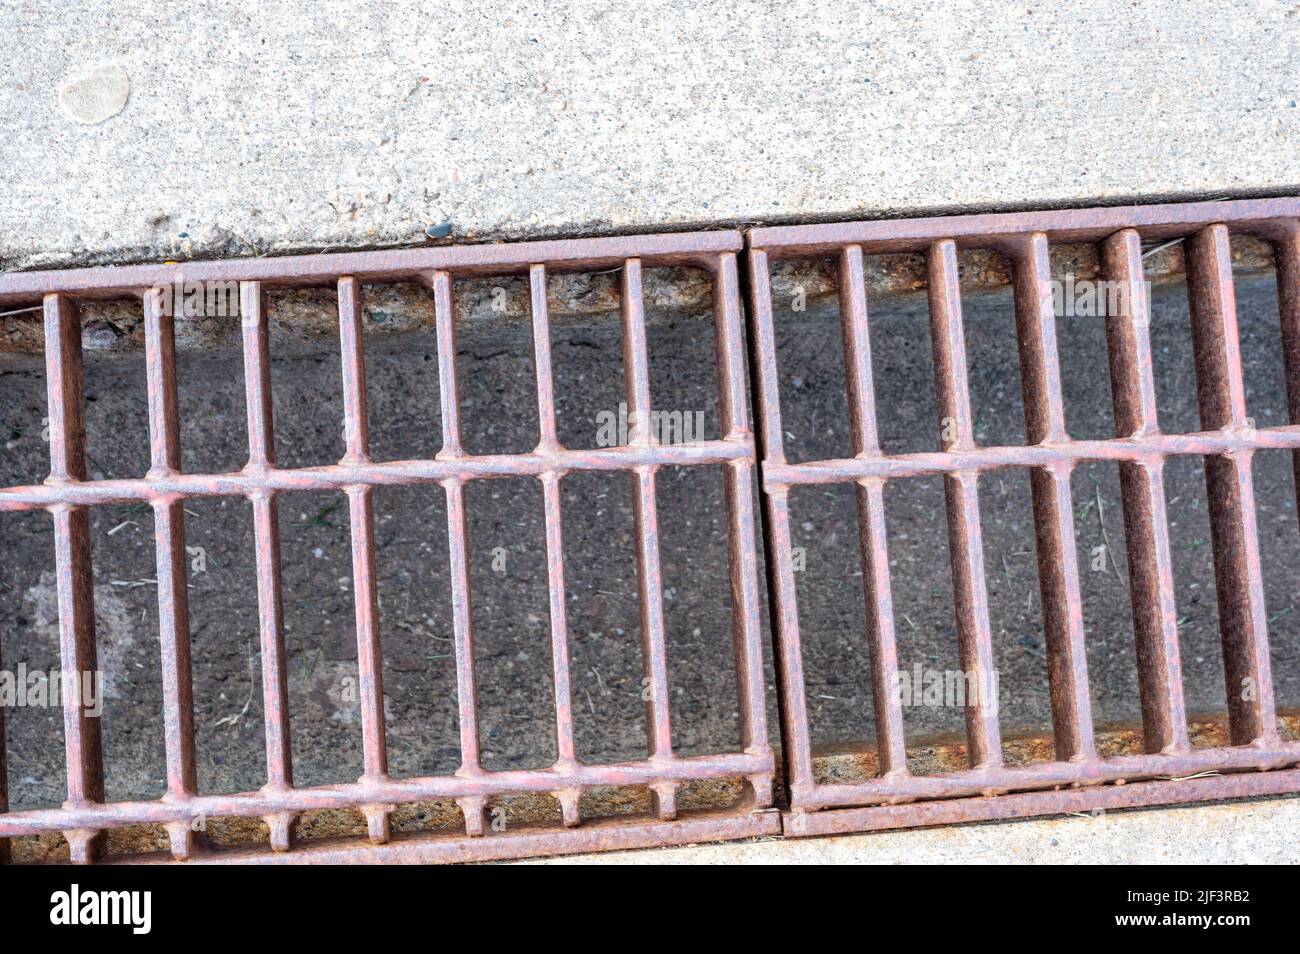 Grate over a stormwater trench in a concrete slab.  Stock Photo